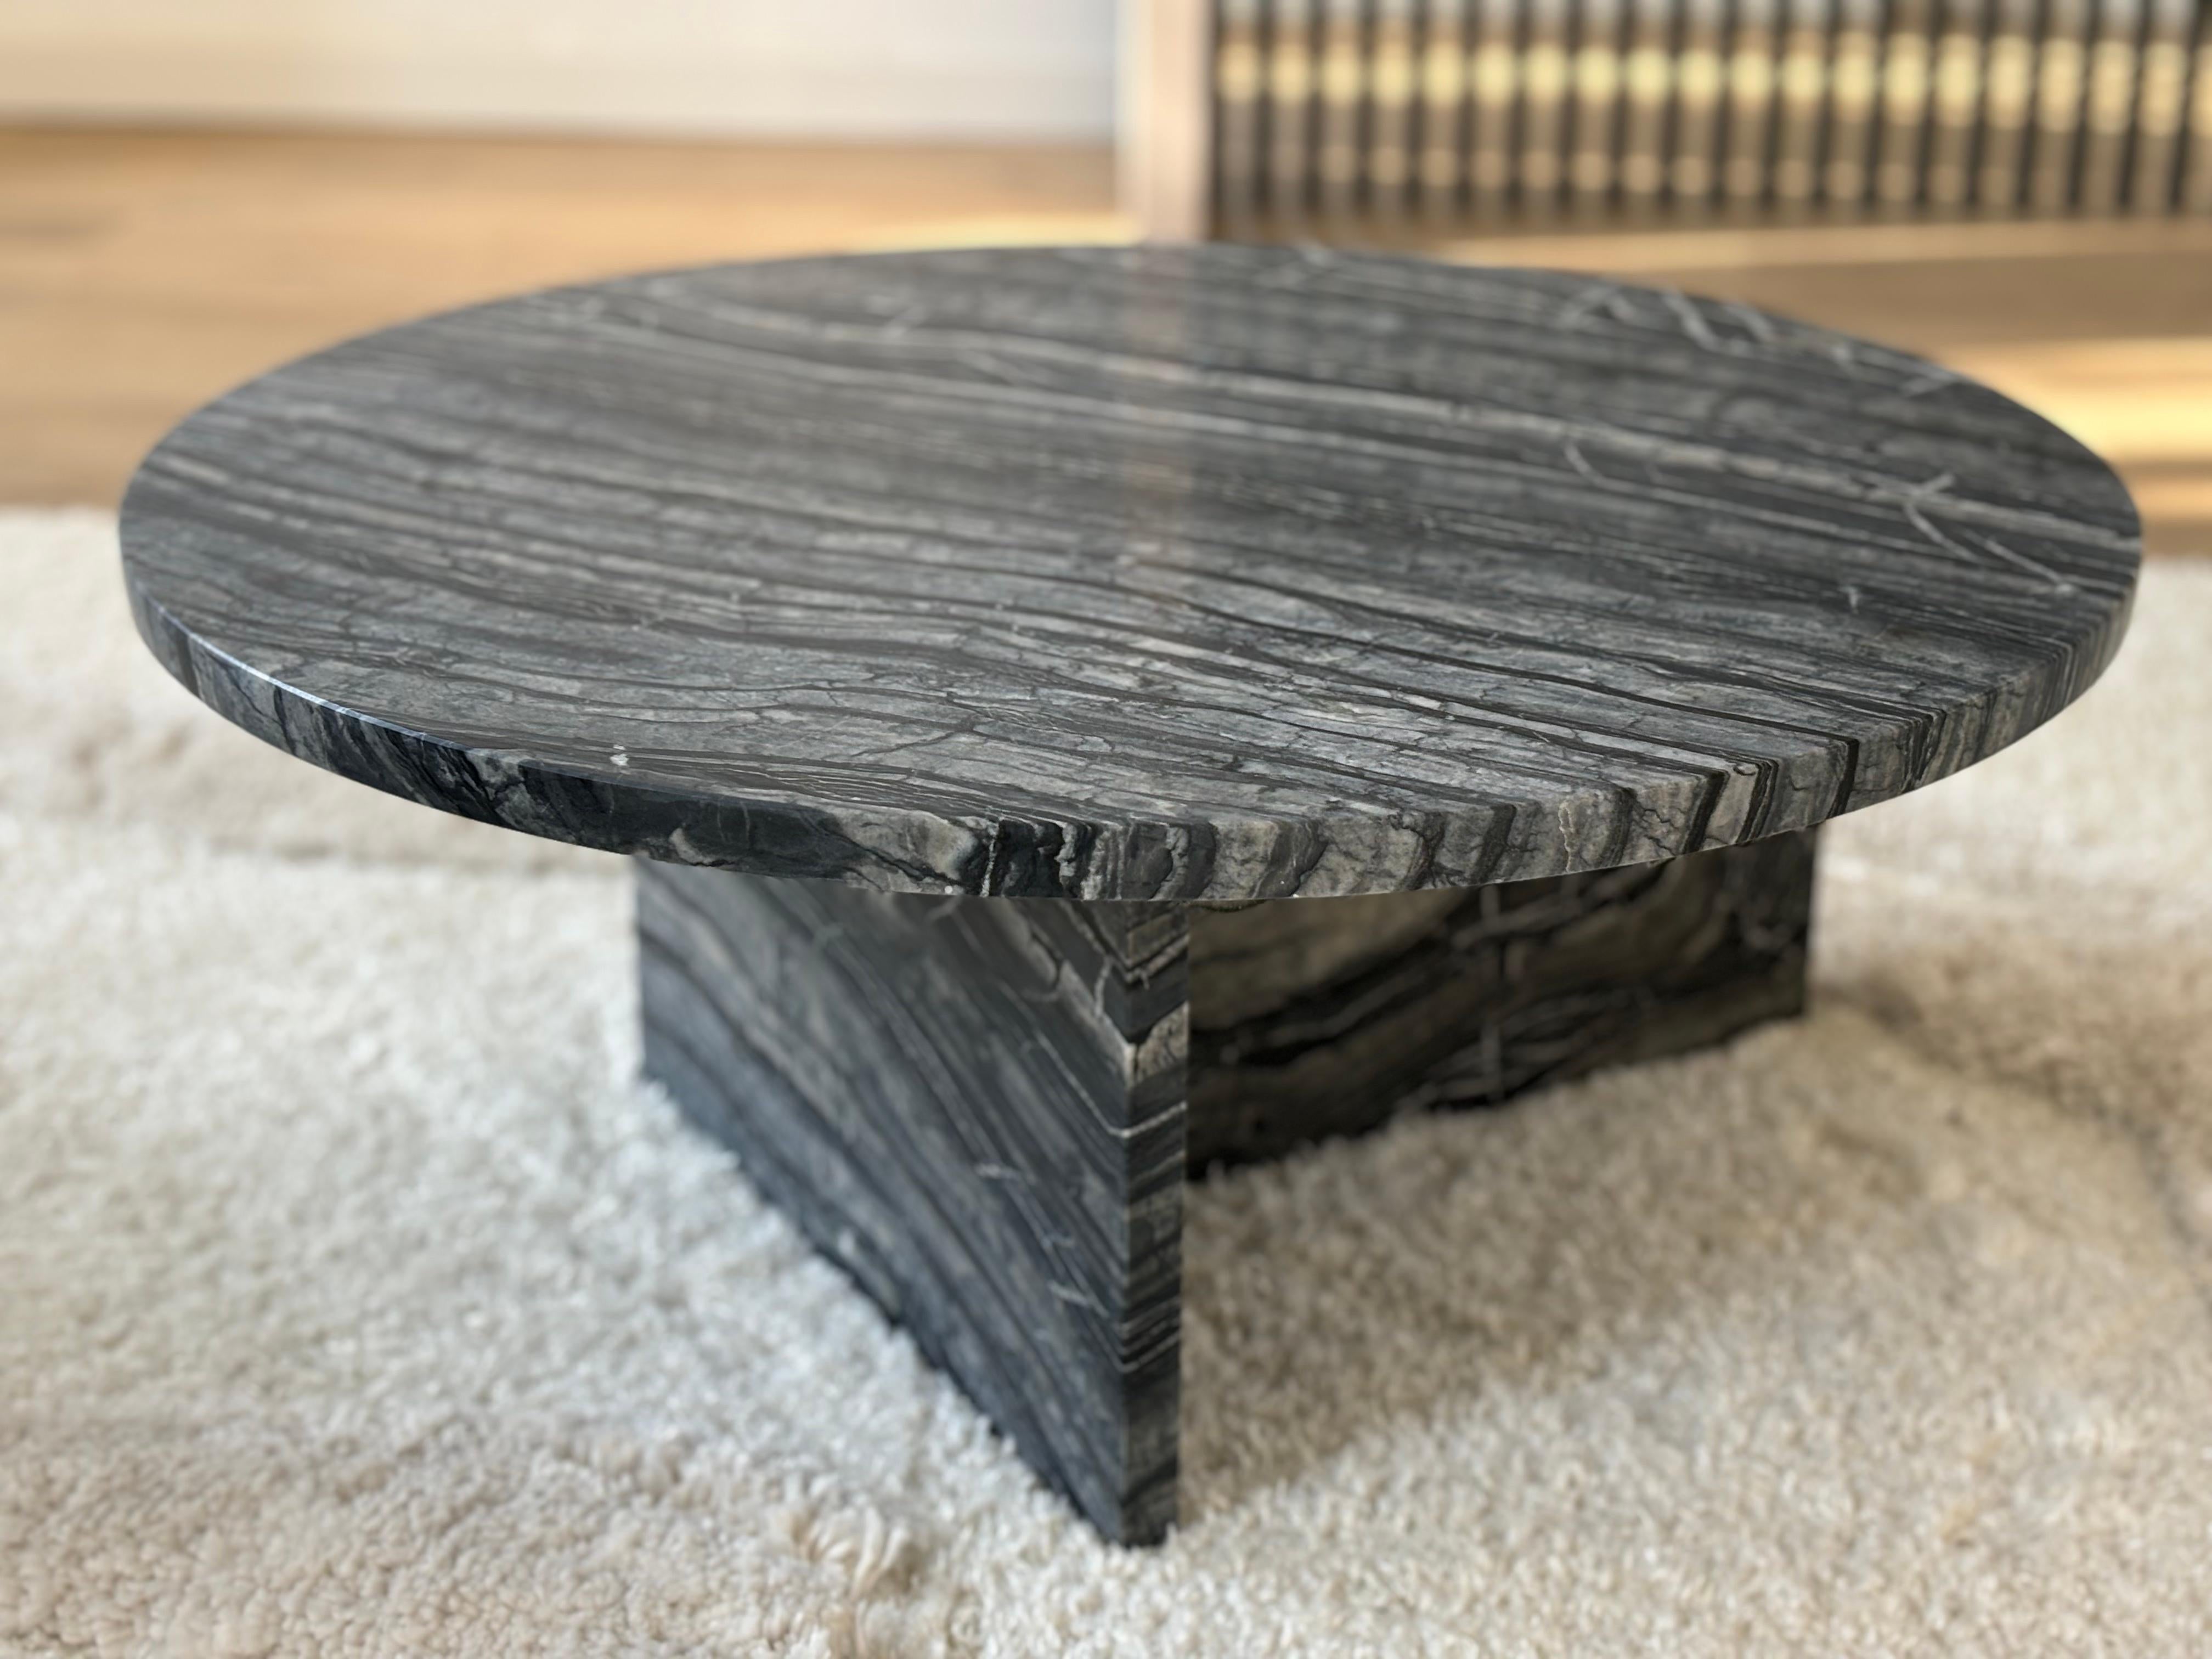 Kenya Black Marble Round Coffee Table, Made in Italy For Sale 3